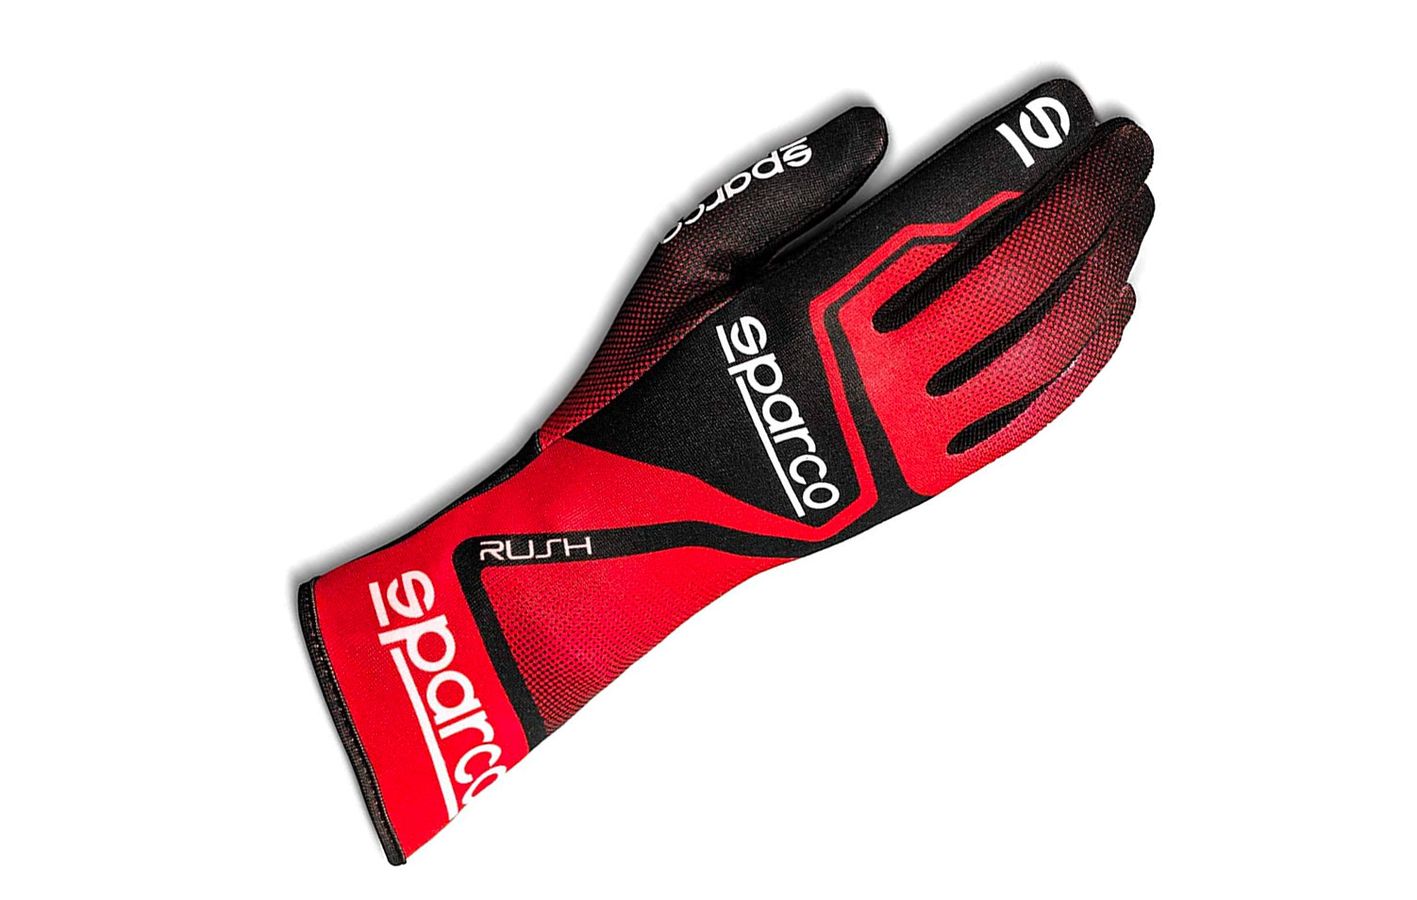 Sparco Rush product image of a black and red glove with white branding.